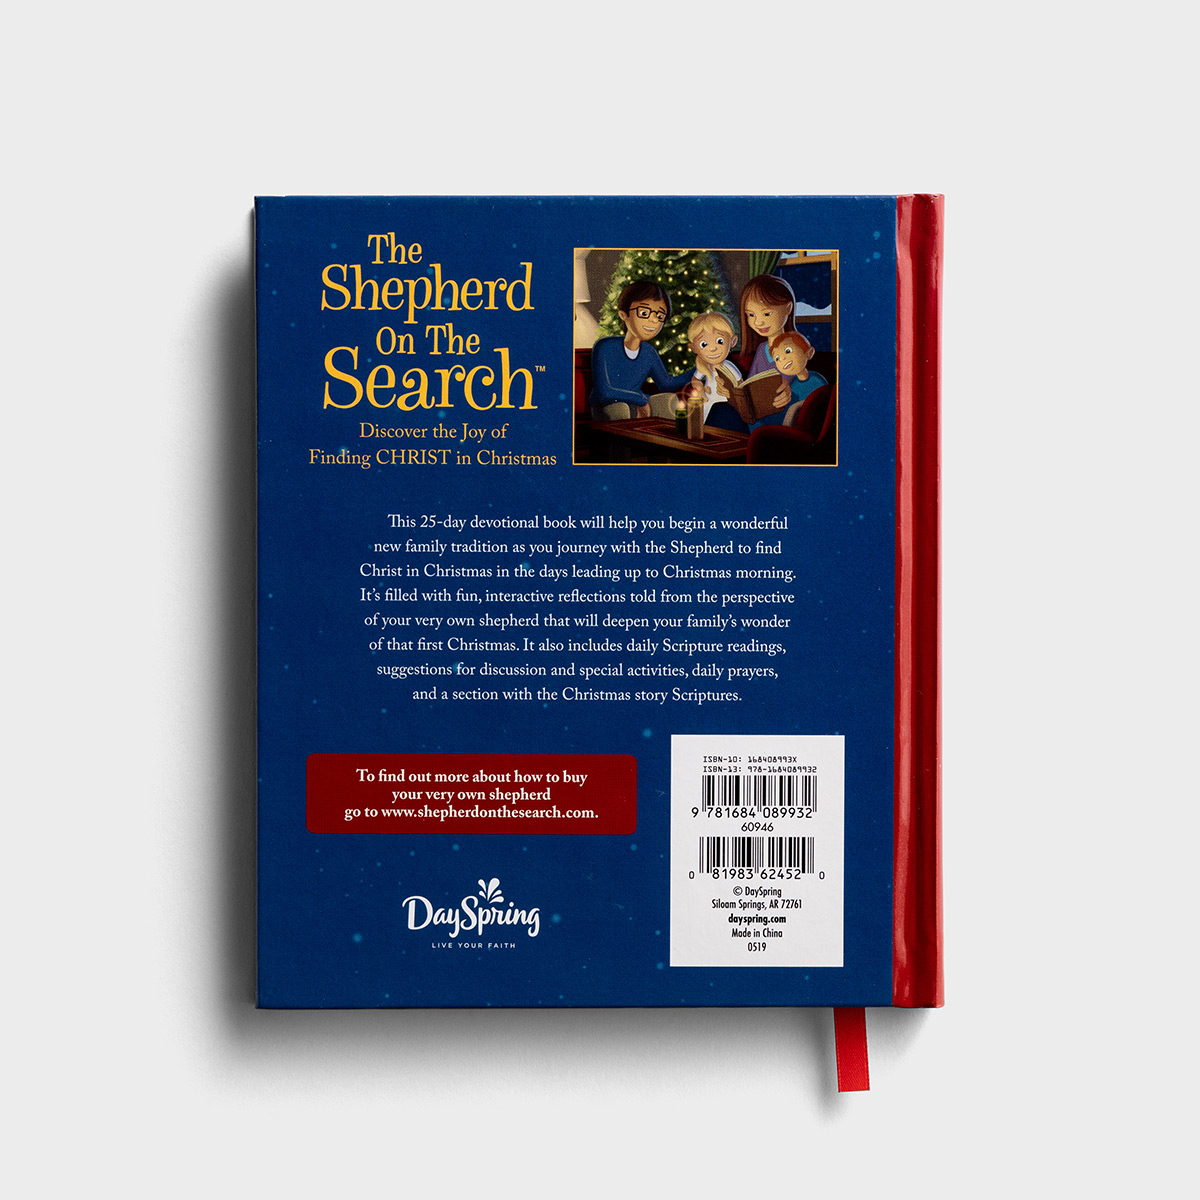 The Shepherd On The Search - 25-Day Family Devotional Advent Book